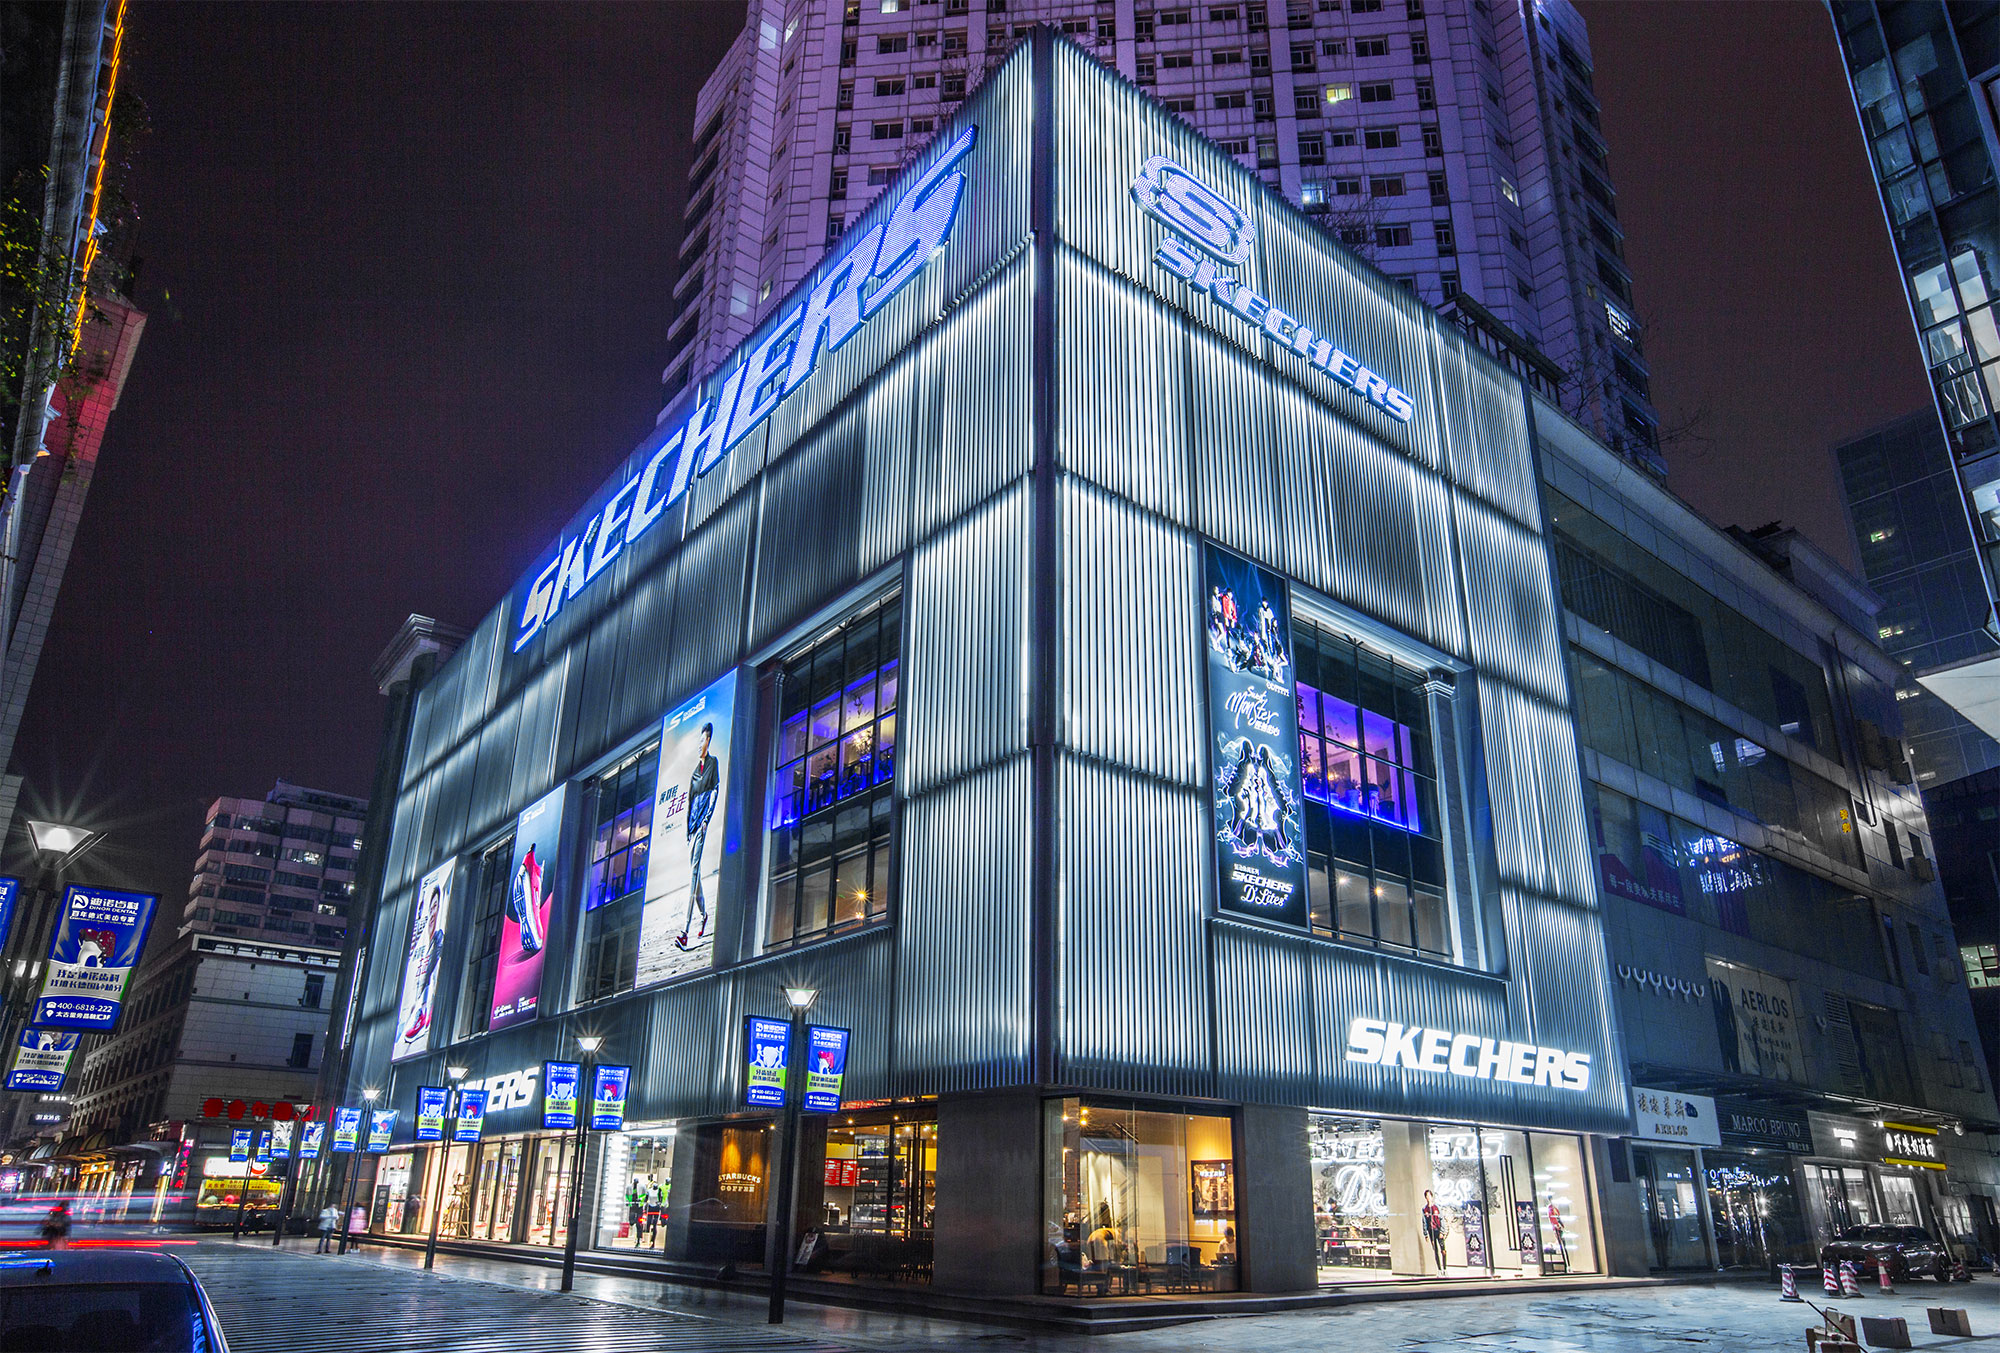 About Us | Skechers Corporate (SKX)